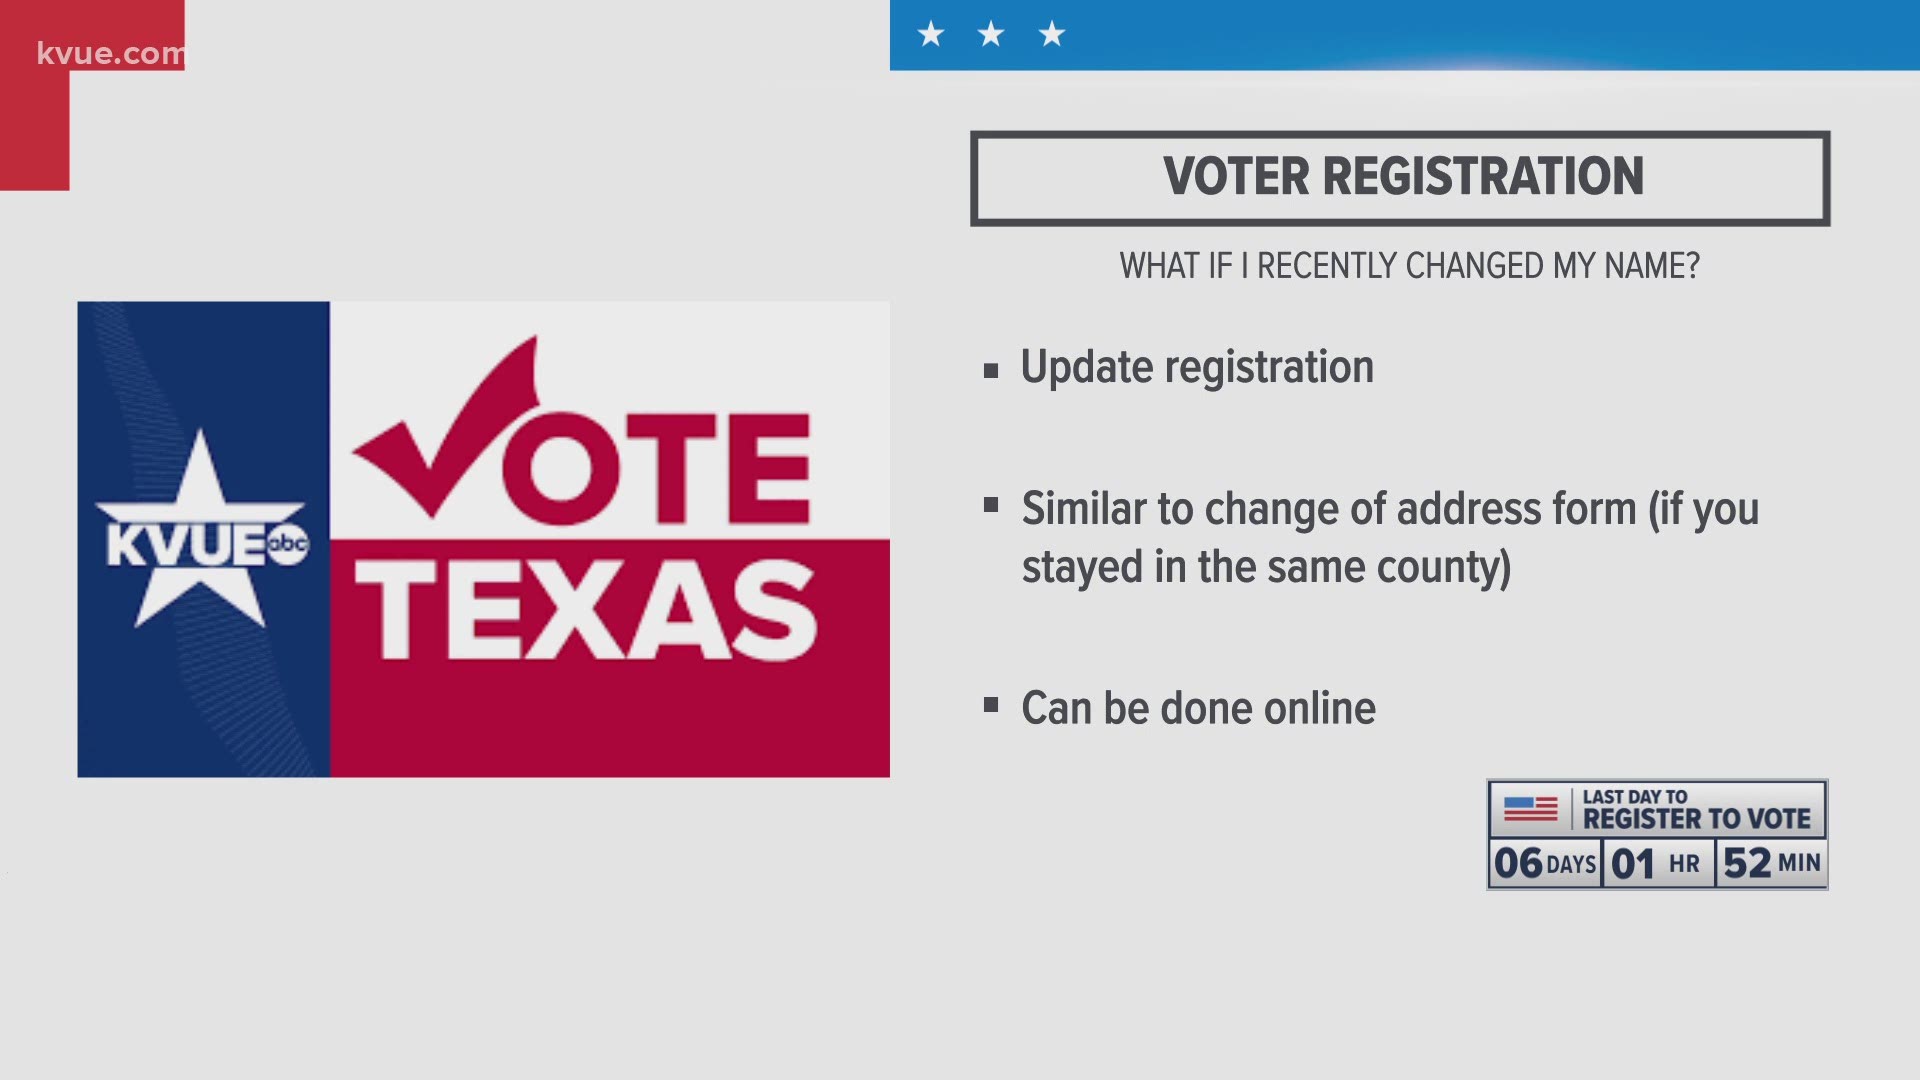 Election officials in Travis County say they're expecting a record voter turnout. KVUE is answering some of your questions about the voting process.